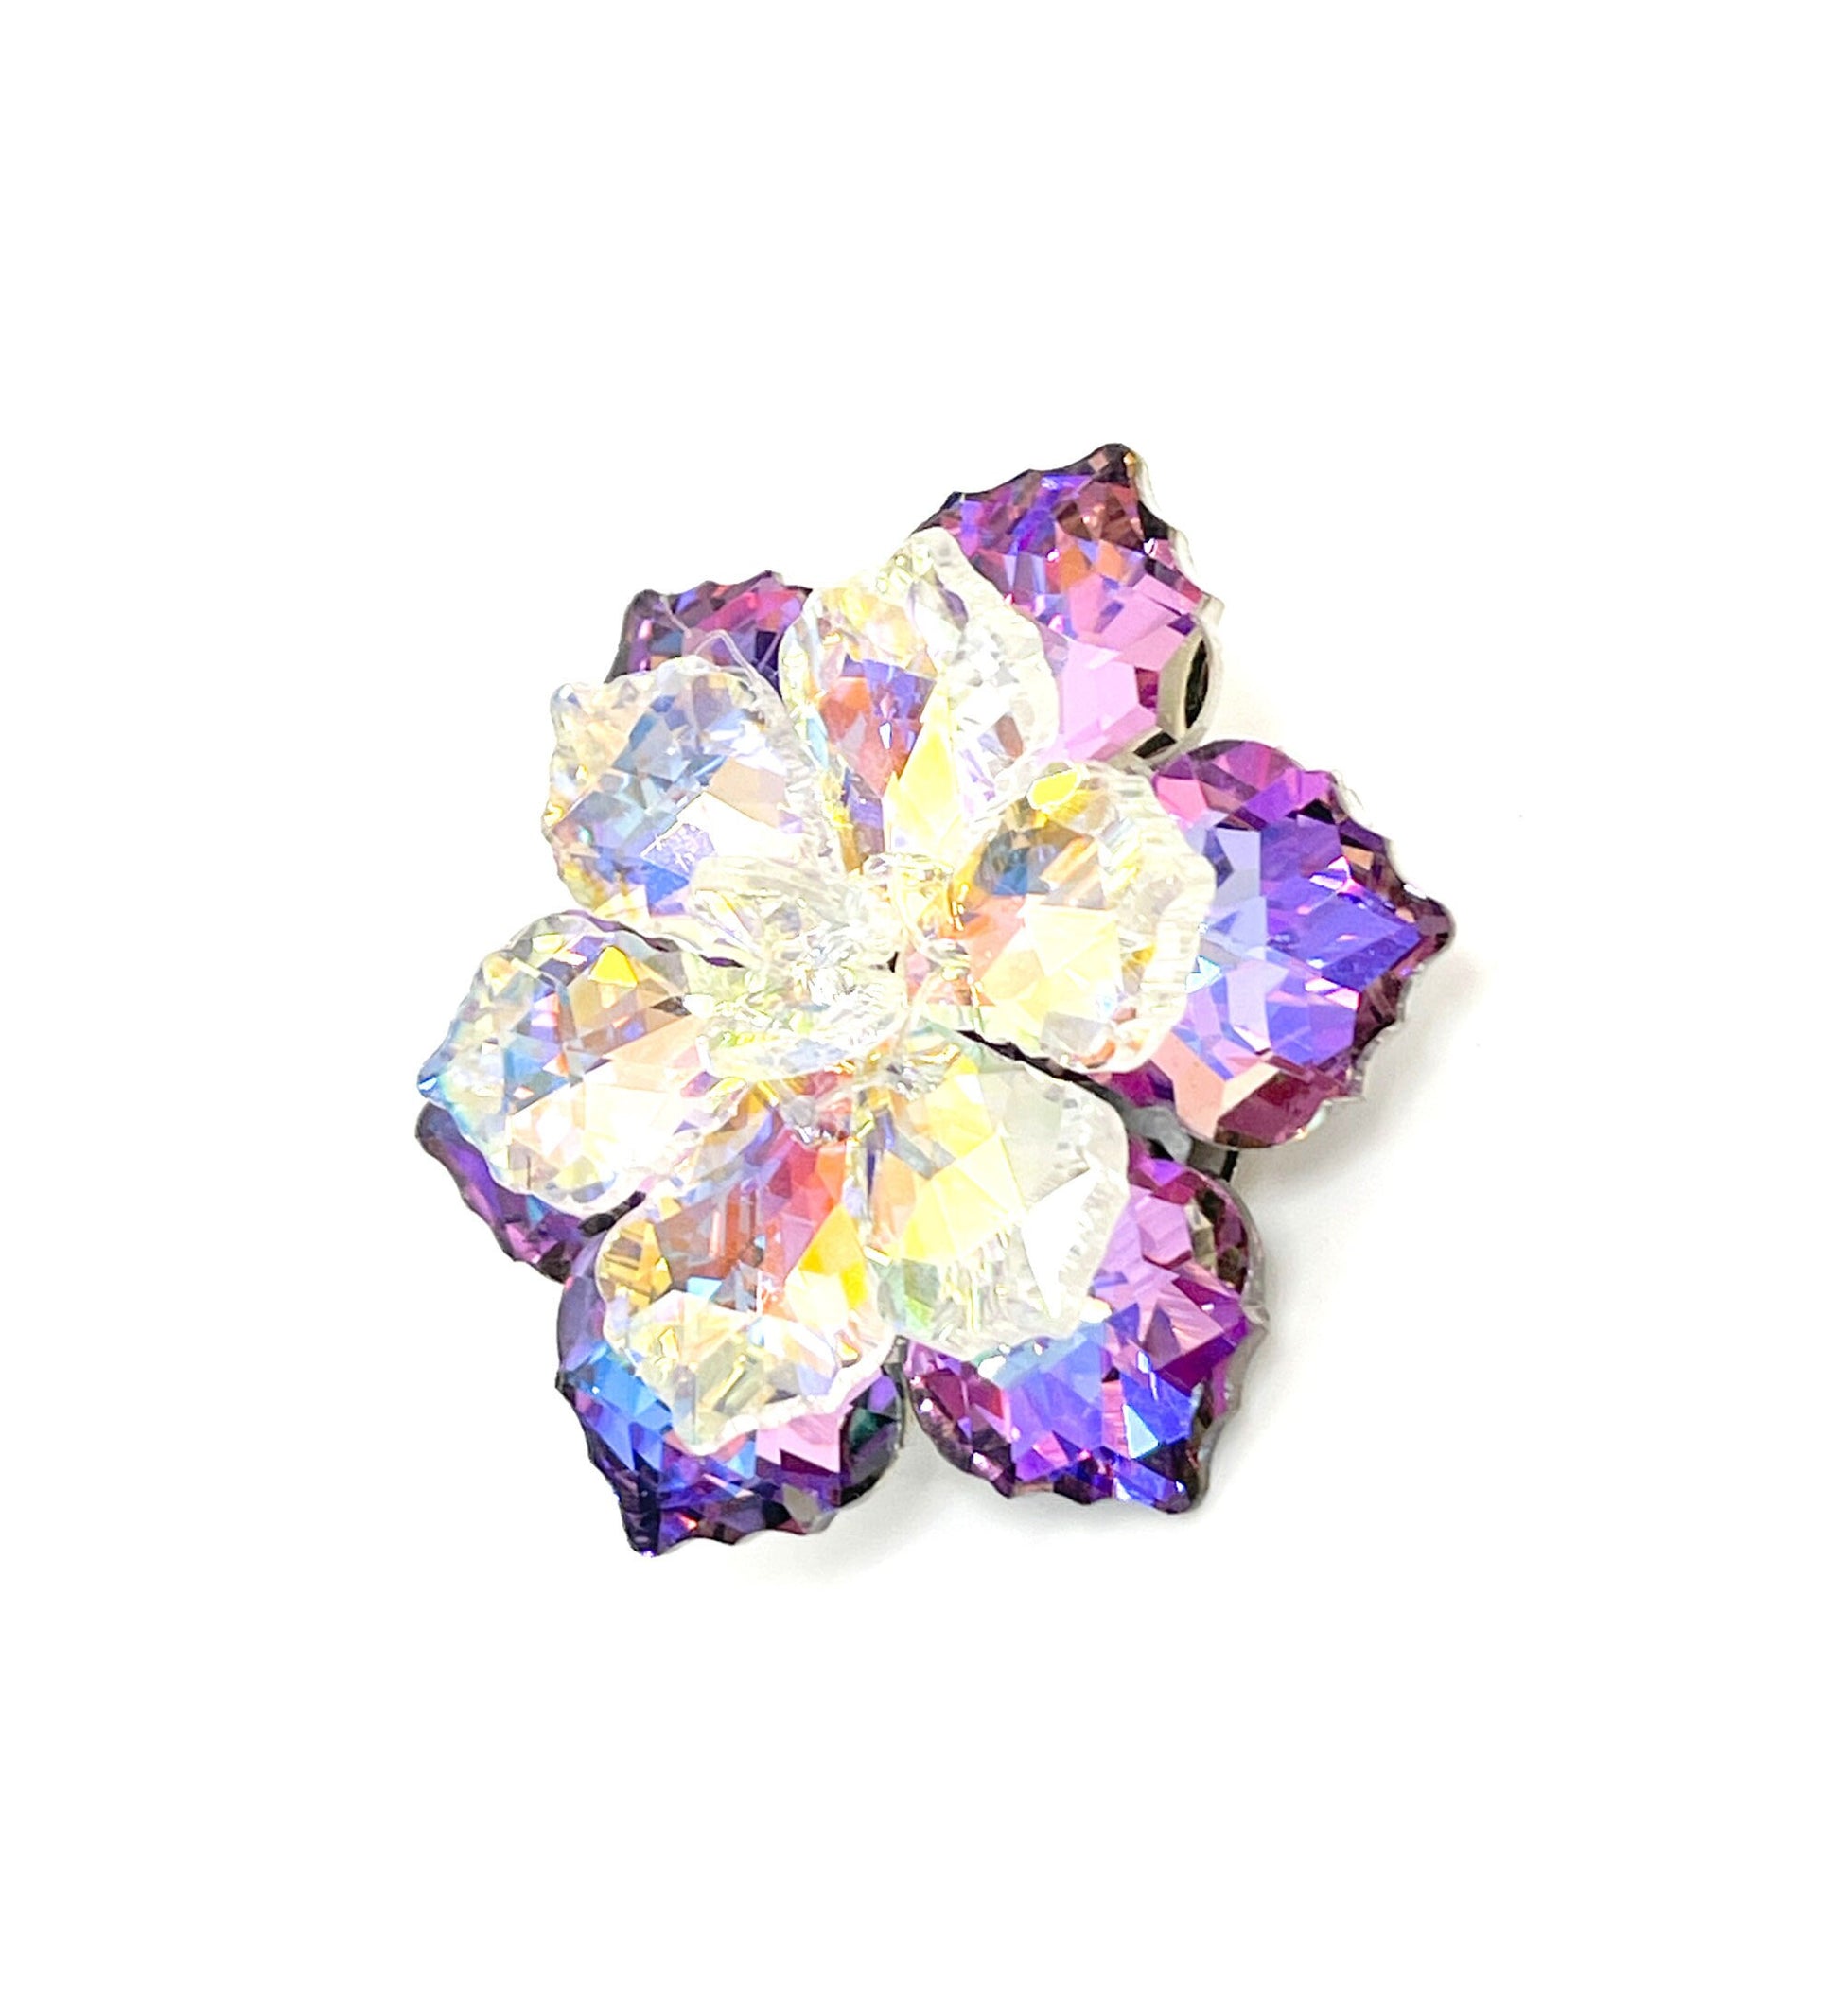 Sparkly Crystal Flower Brooch, Crystal Daisy Pin, Statement Brooch, Very Sparkly Jacket Pin, Brooches For Women